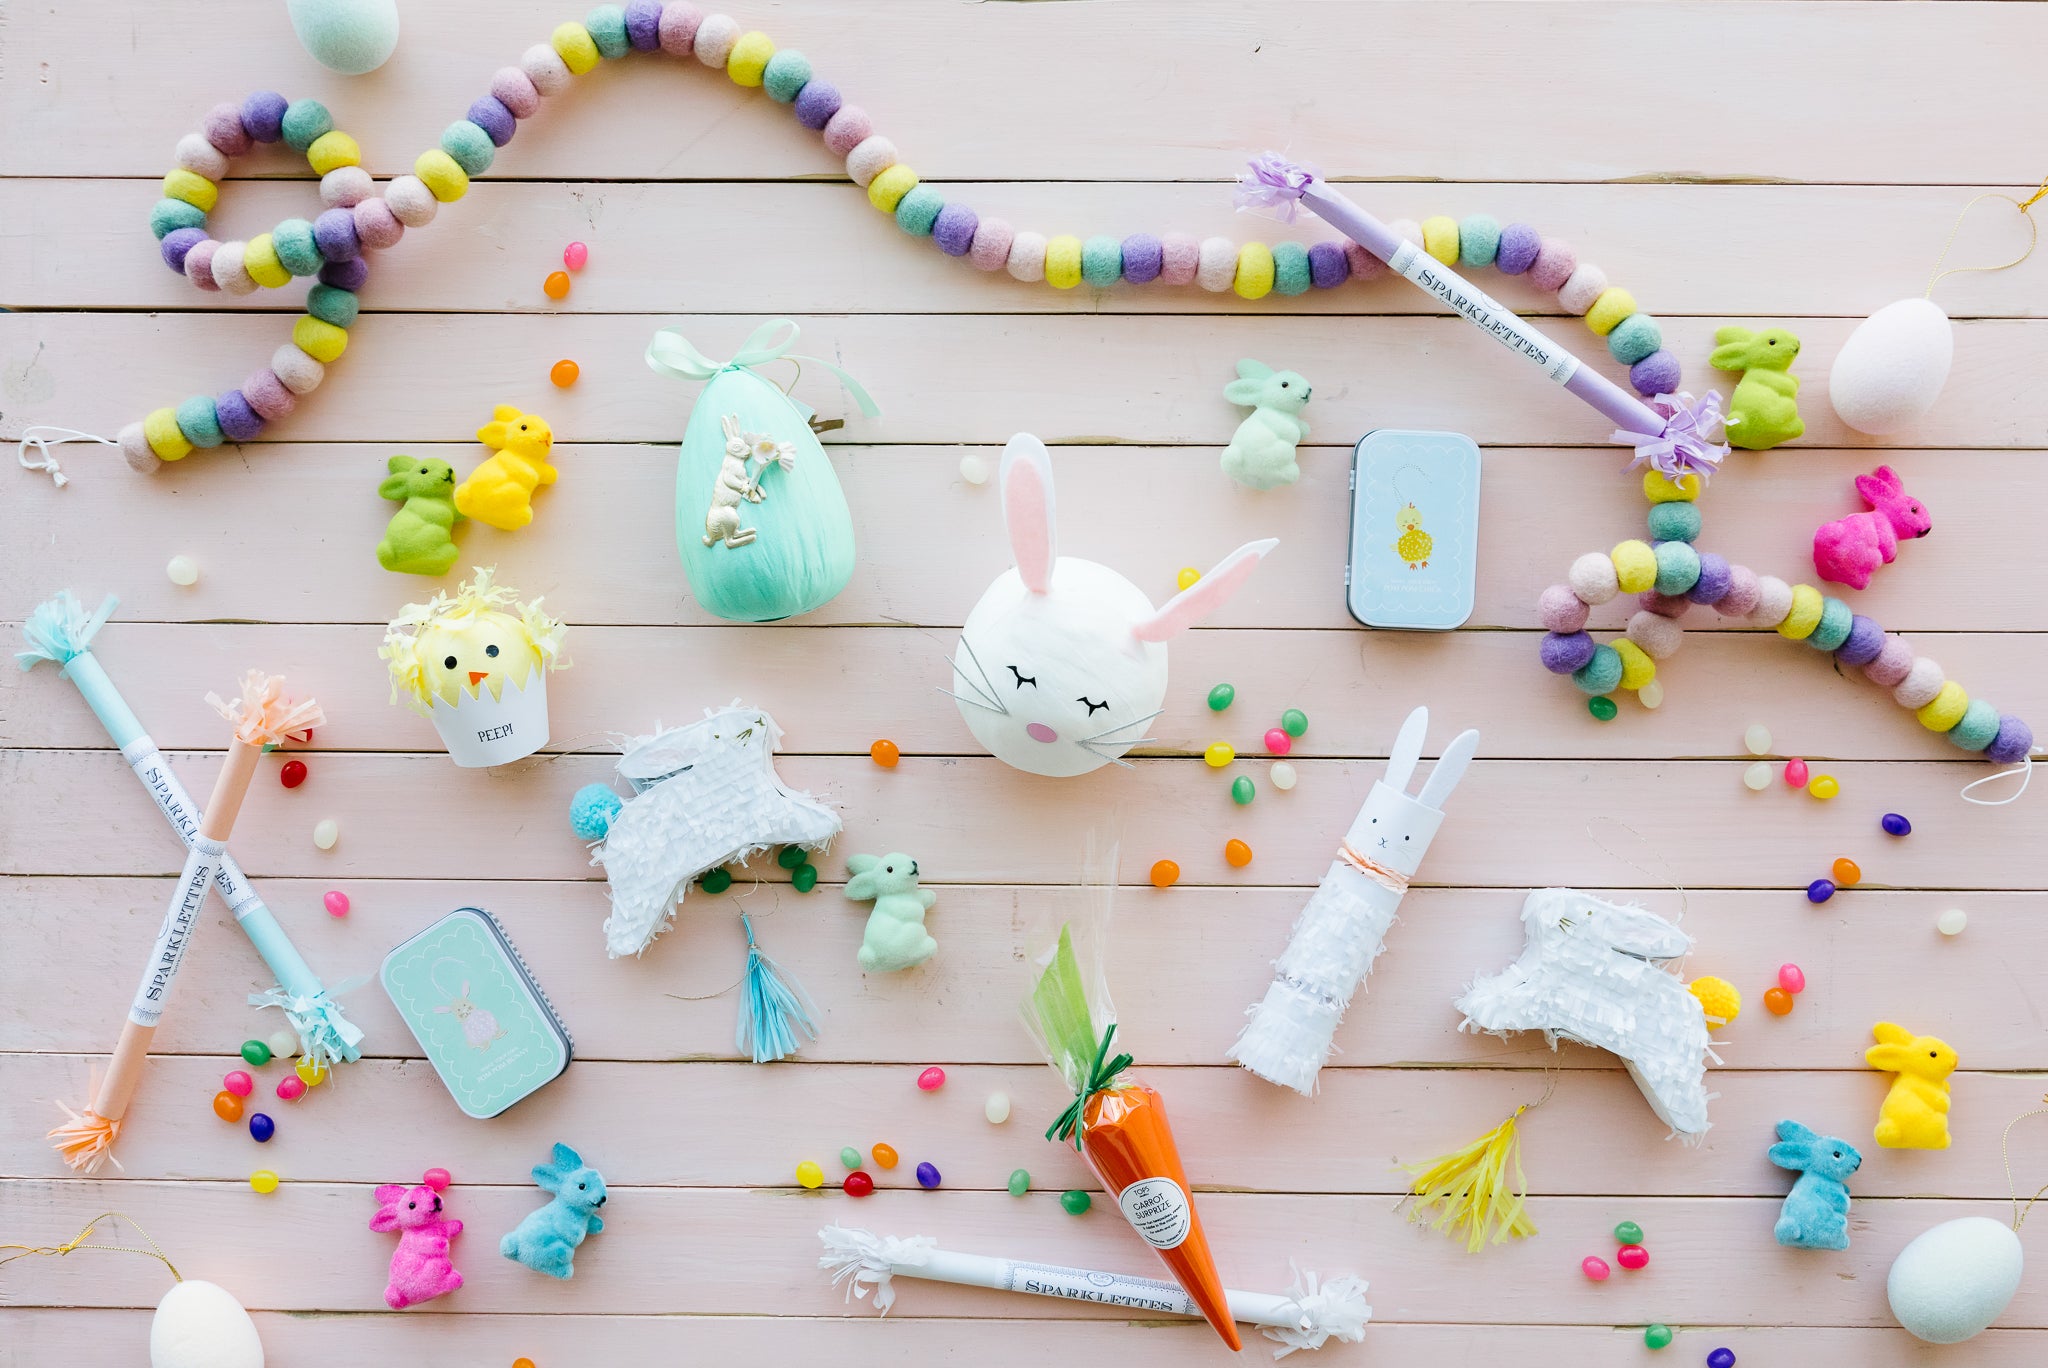 Easter basket stuffers and gift ideas for all ages